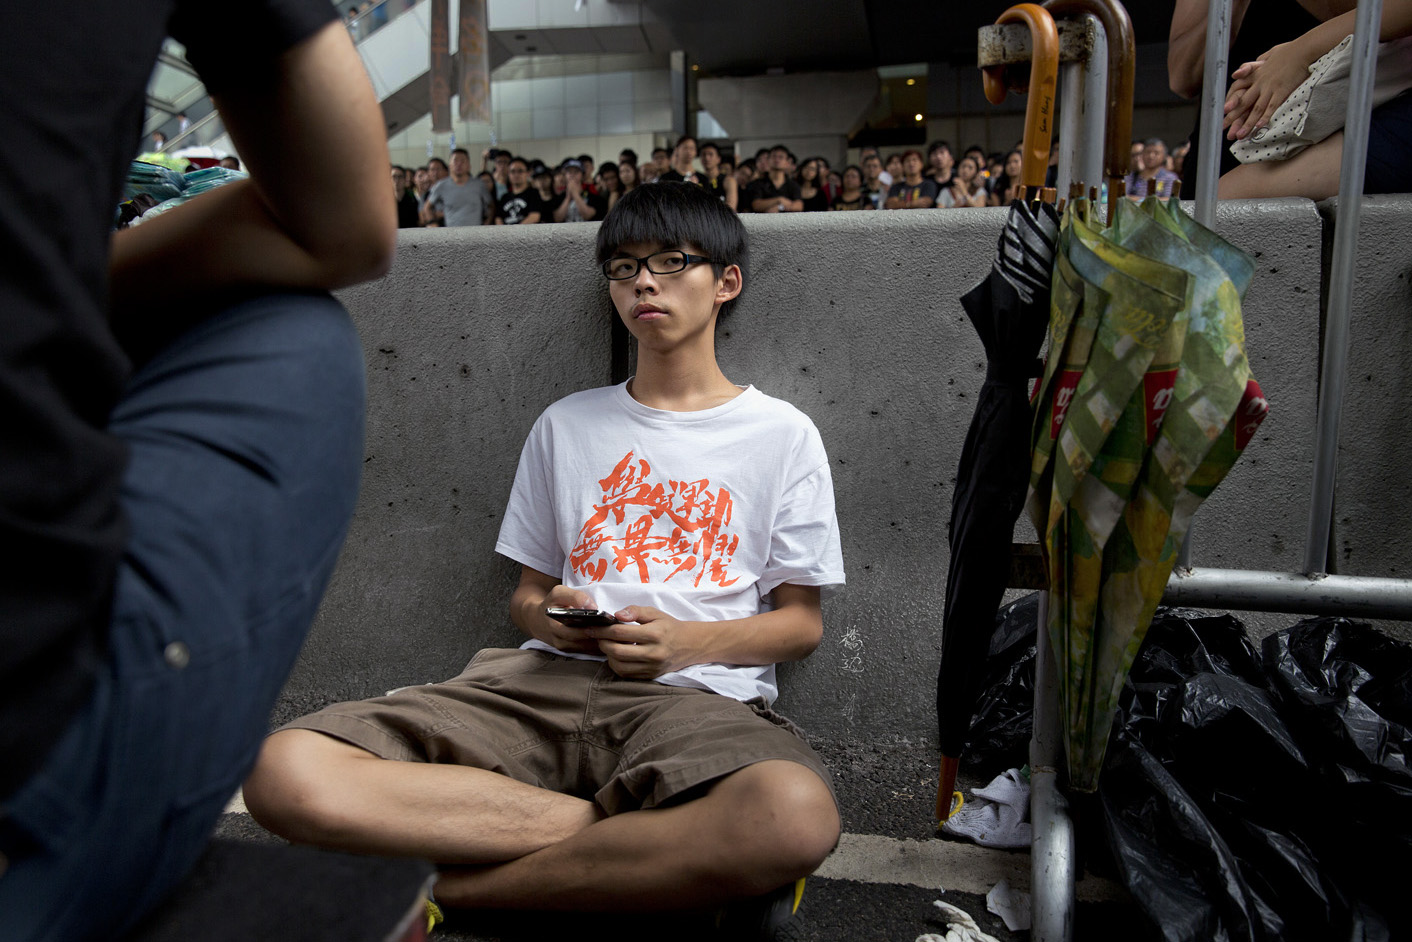 Democracy demonstrations in Hong Kong. Students and pro-democracy citizens being attacked and shouted at by anti-demonstration group in Mongkok. Pro-police rally. Joshua Wong, 17-year-old protest leader.by James Nachtwey